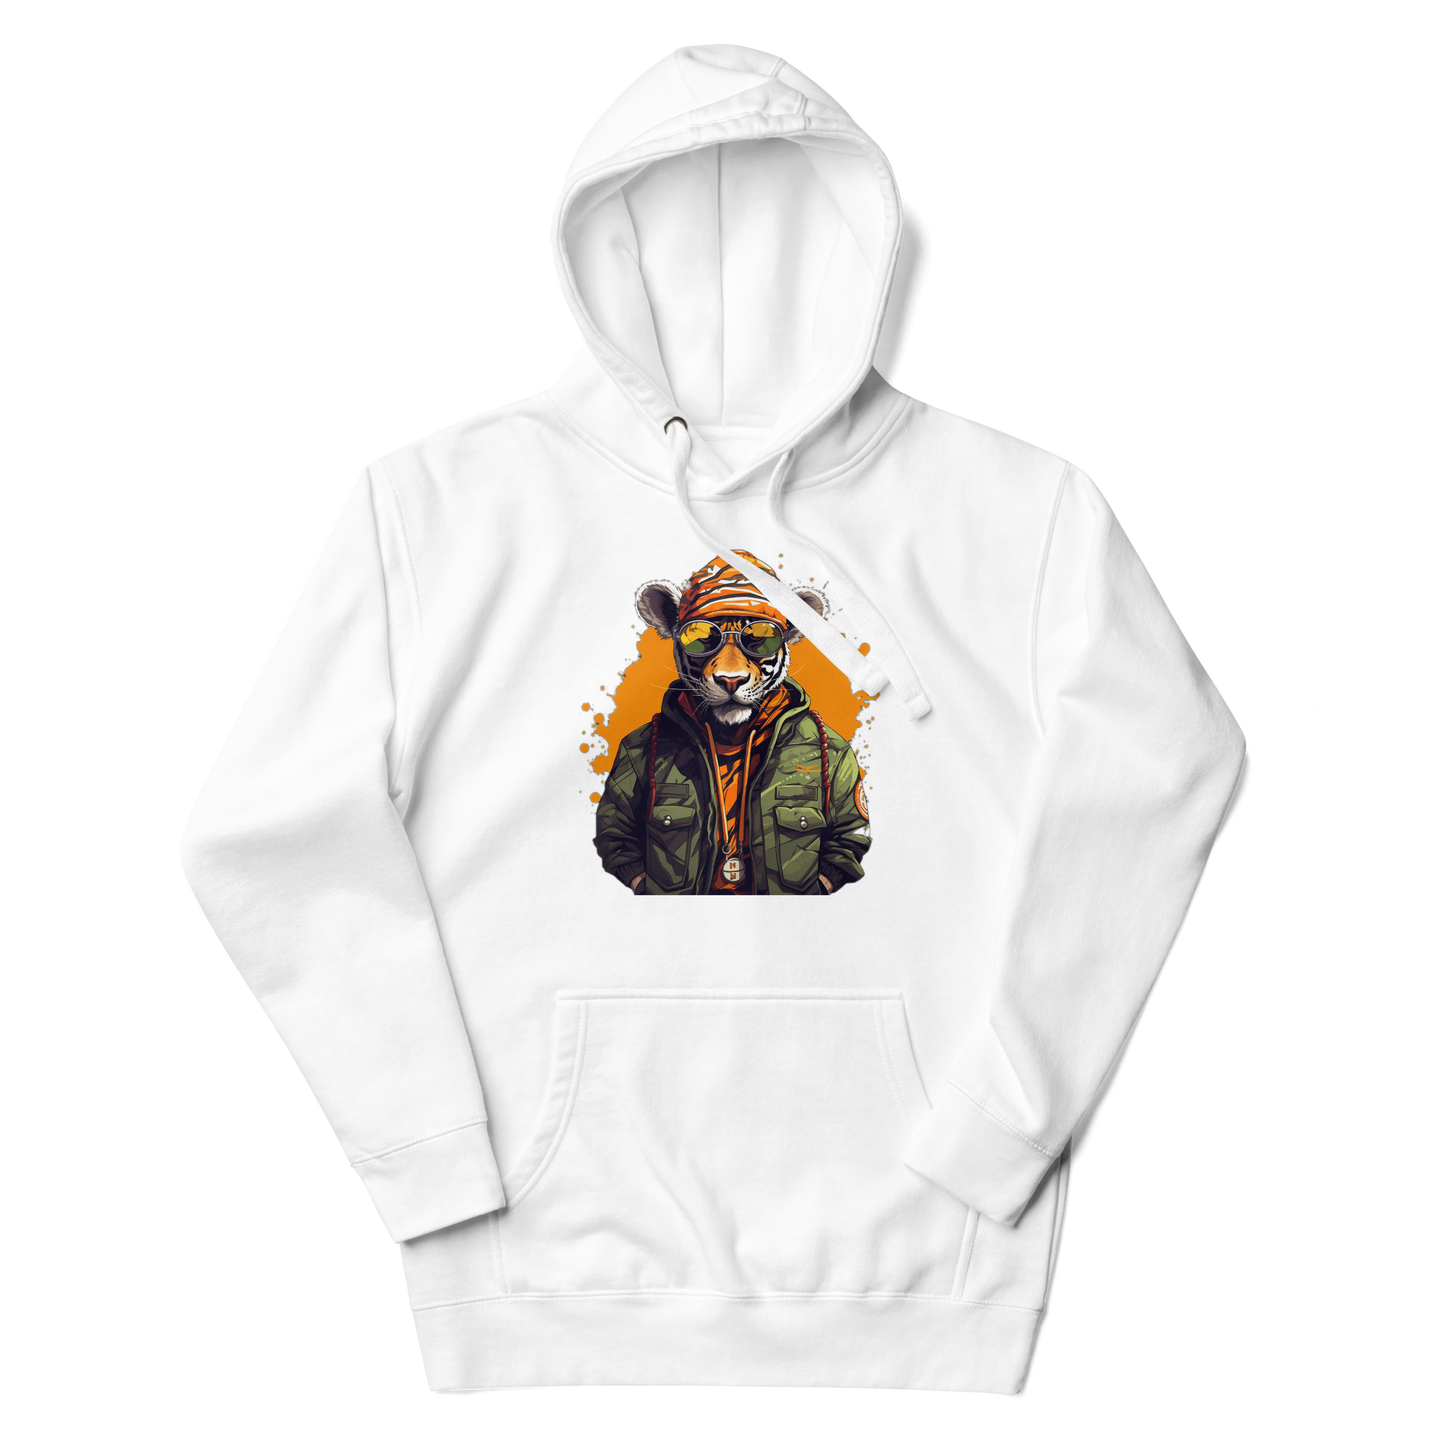 The Jungle Graphic Hoodie